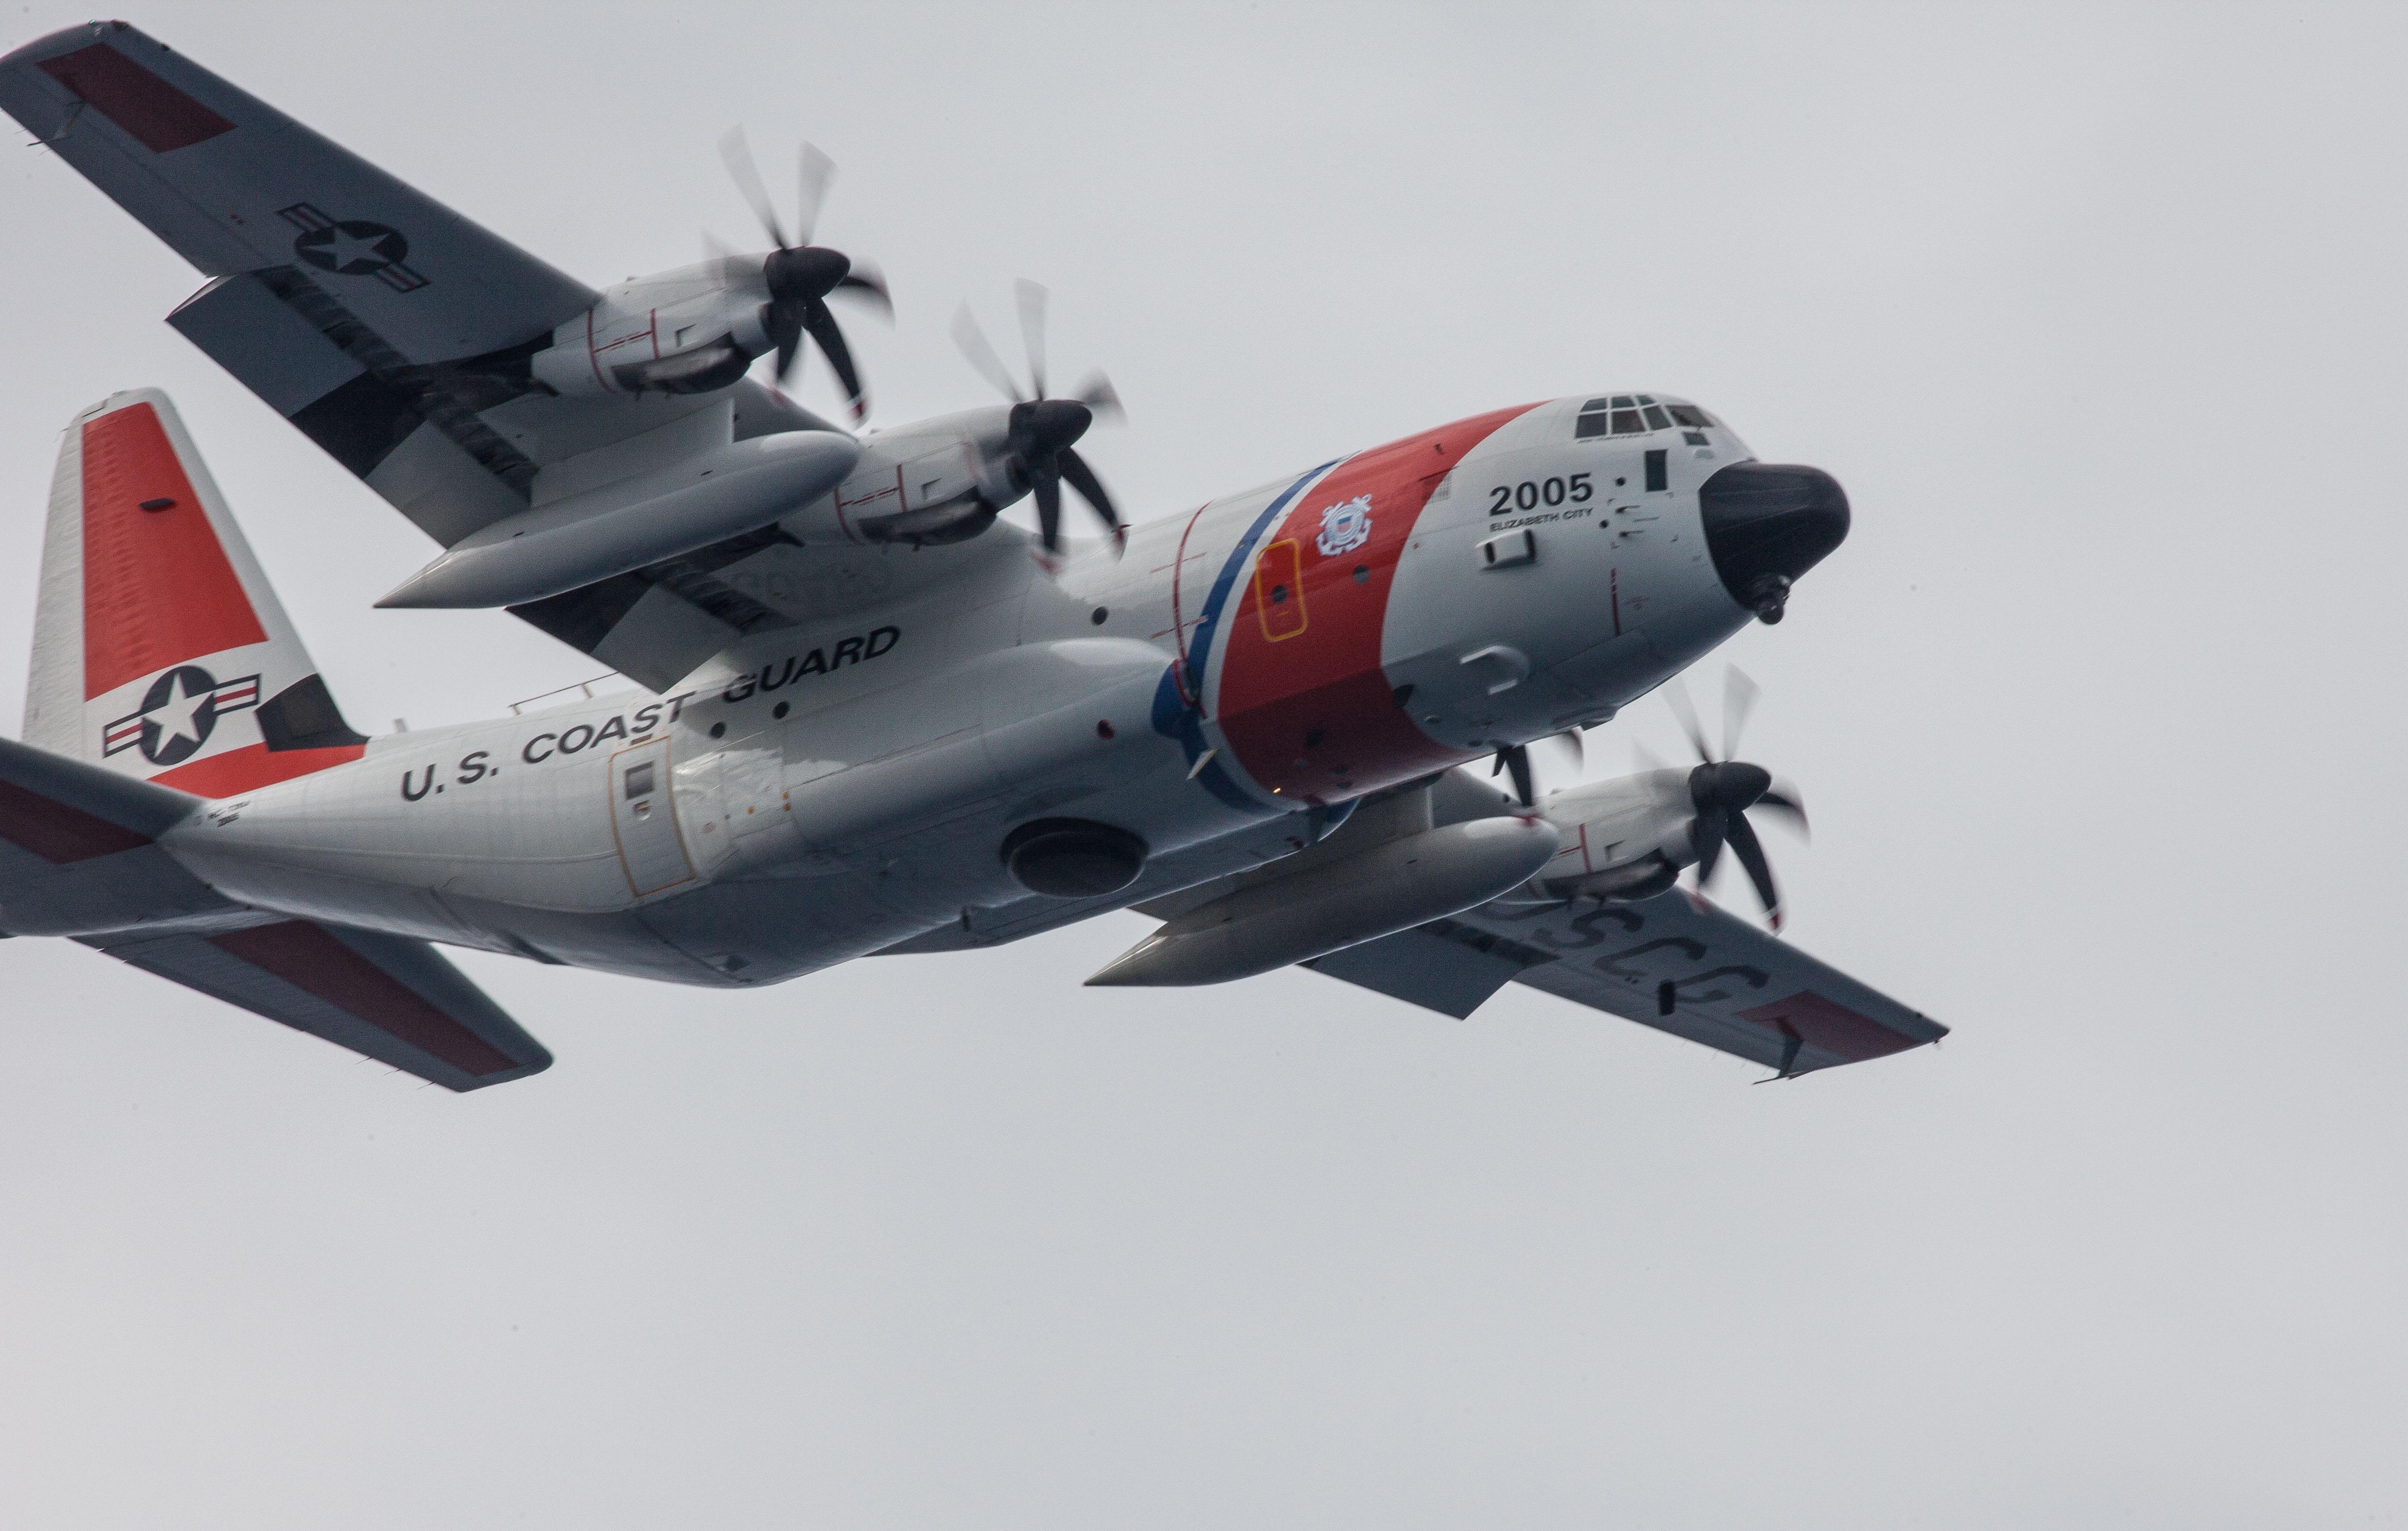 A United States Coast Guard C-130 aircraft provided overhead surveillance during a drug interdiction off the Pacific coast of Central America during Operation CARIBBE on 5 November, 2016. Image By: Royal Canadian Navy Public Affairs